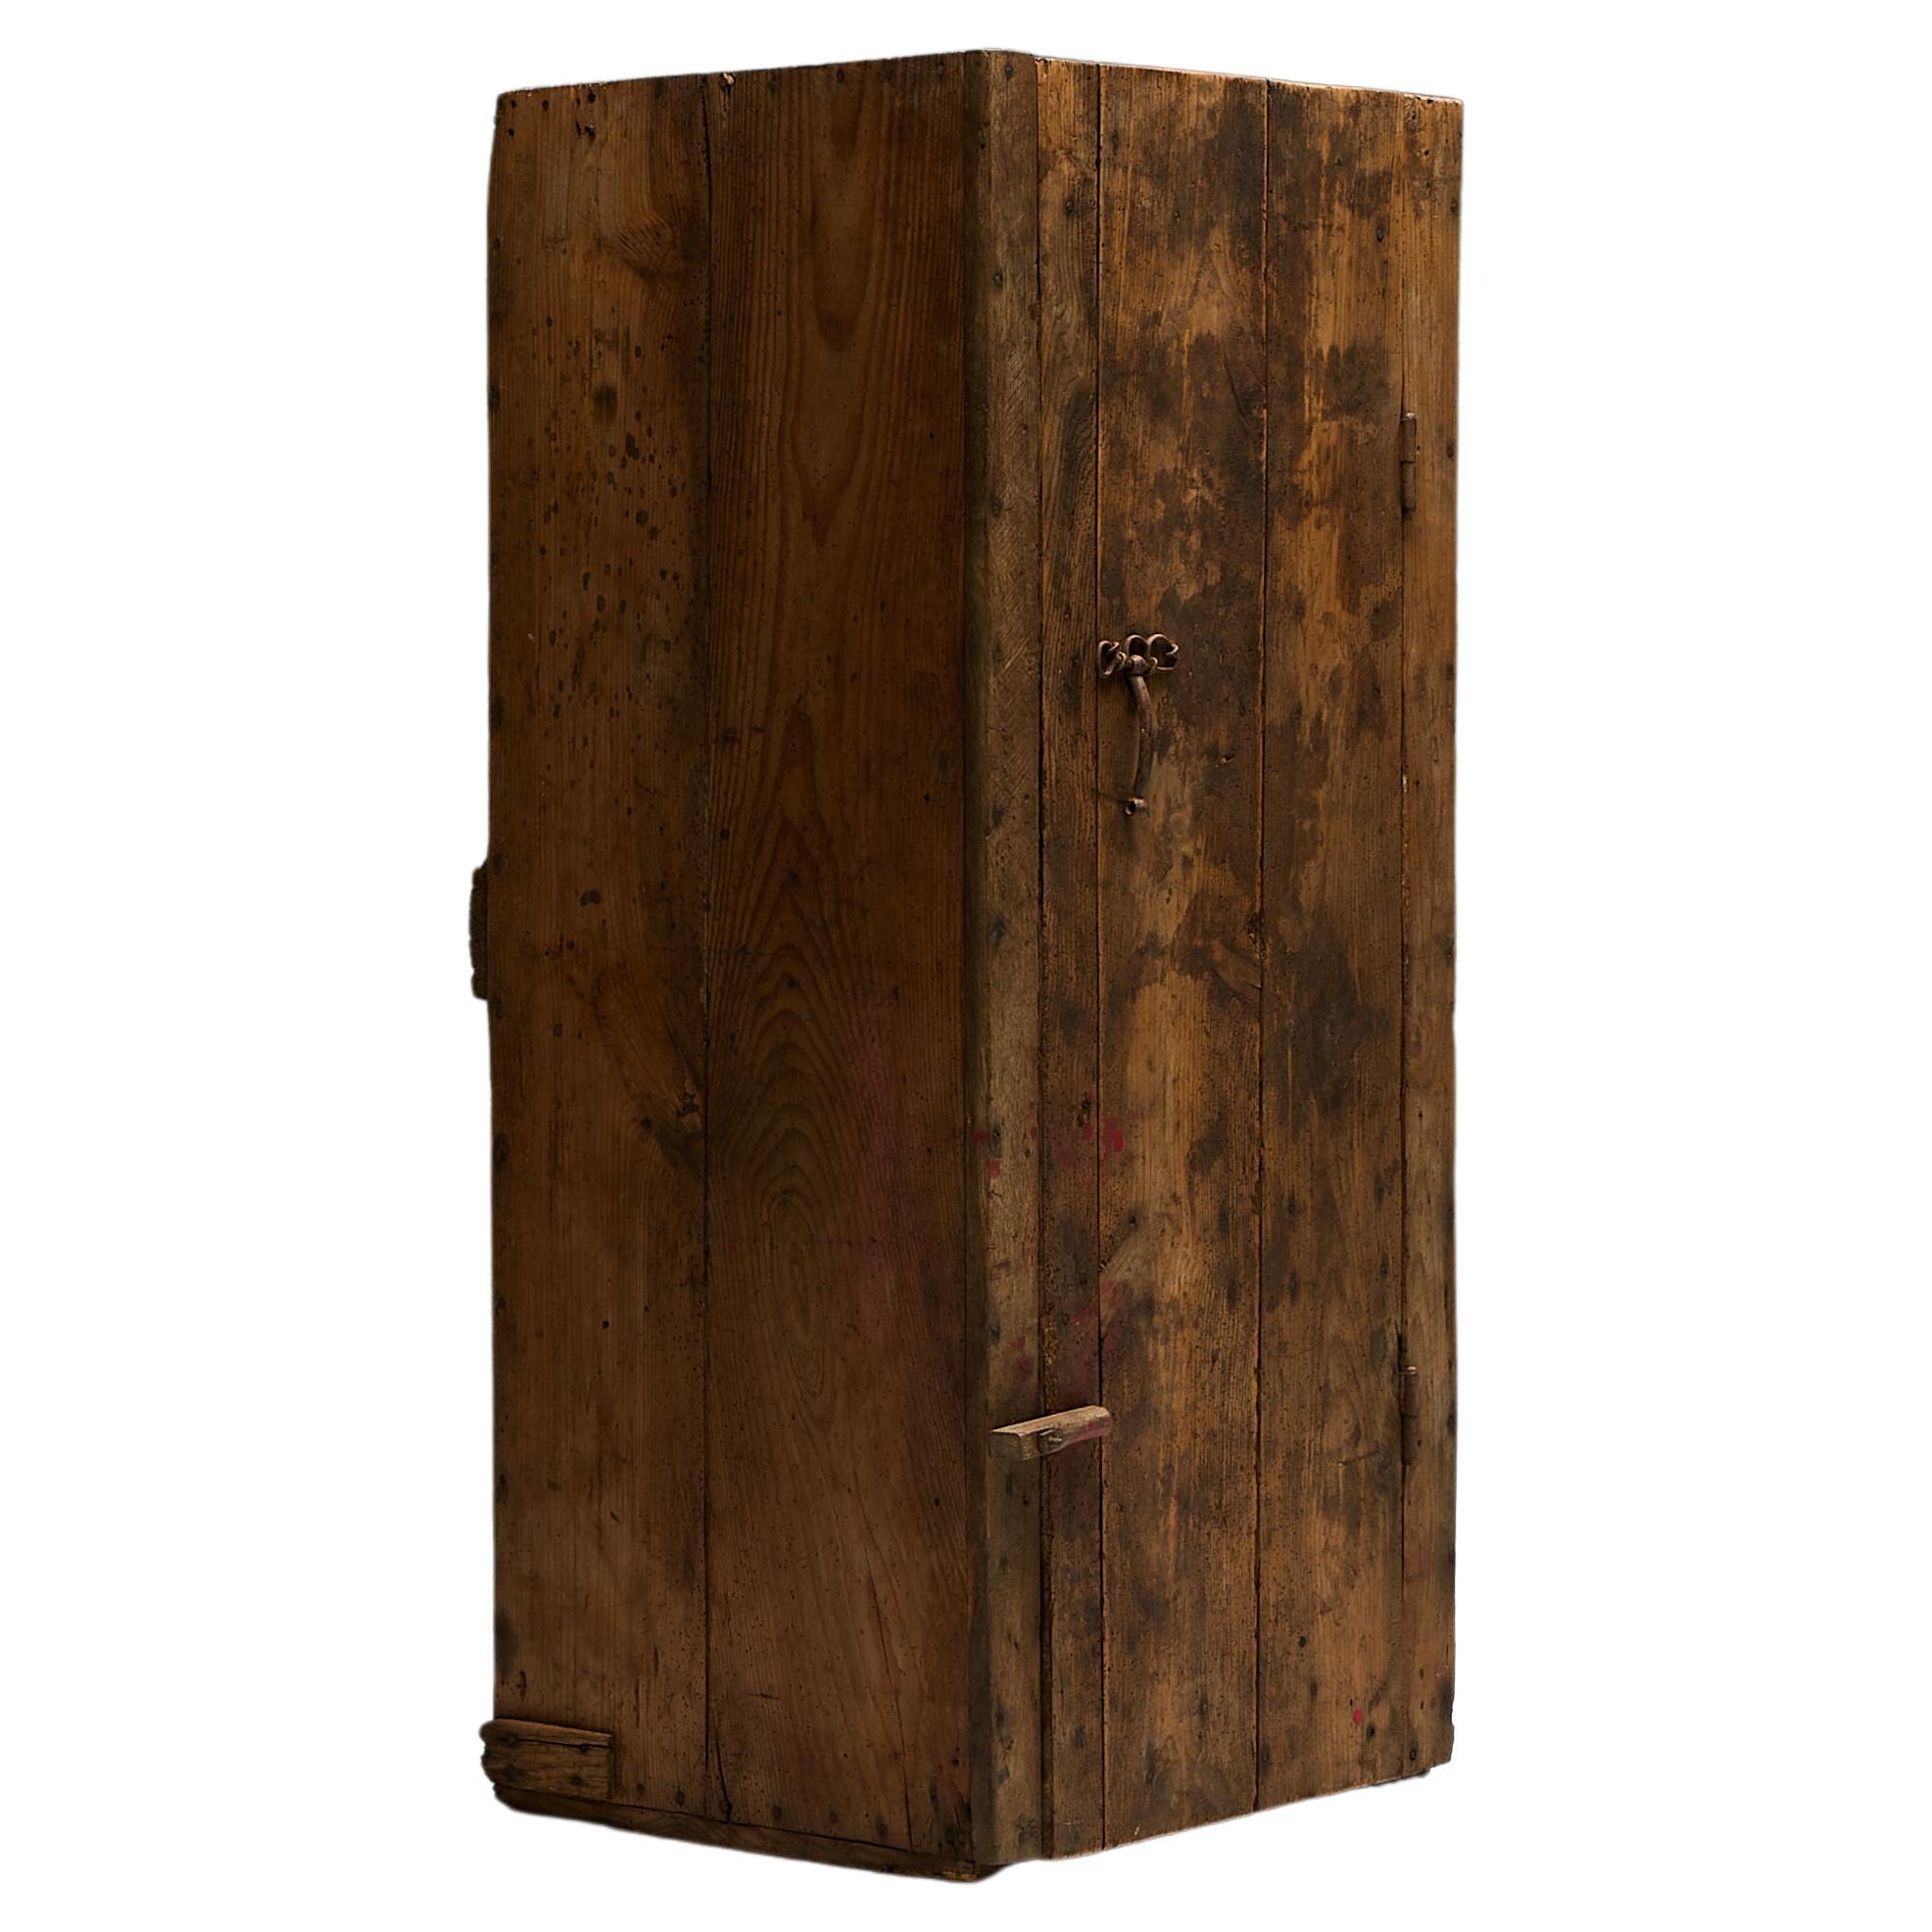 Rustic Art Populaire Cabinet - 19th Century For Sale